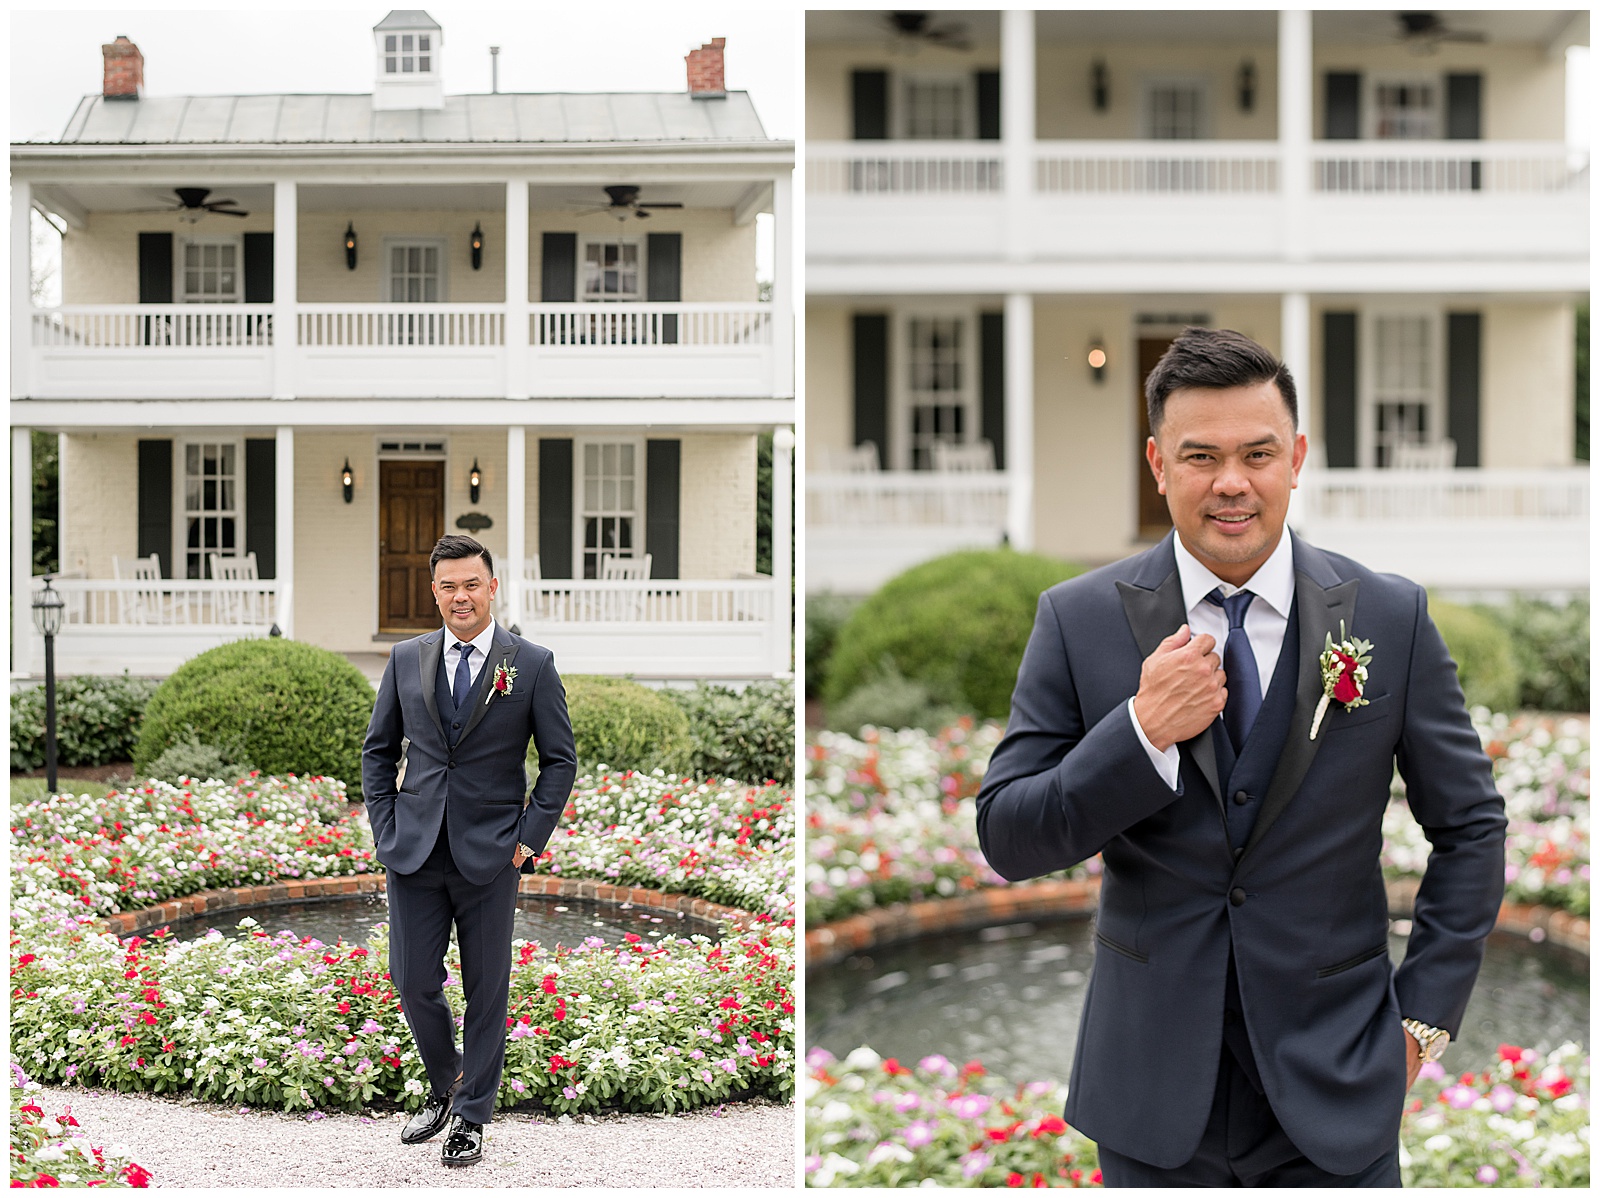 groom looking directly at camera smiling and holding edge of suit coat outside white home with black shutters